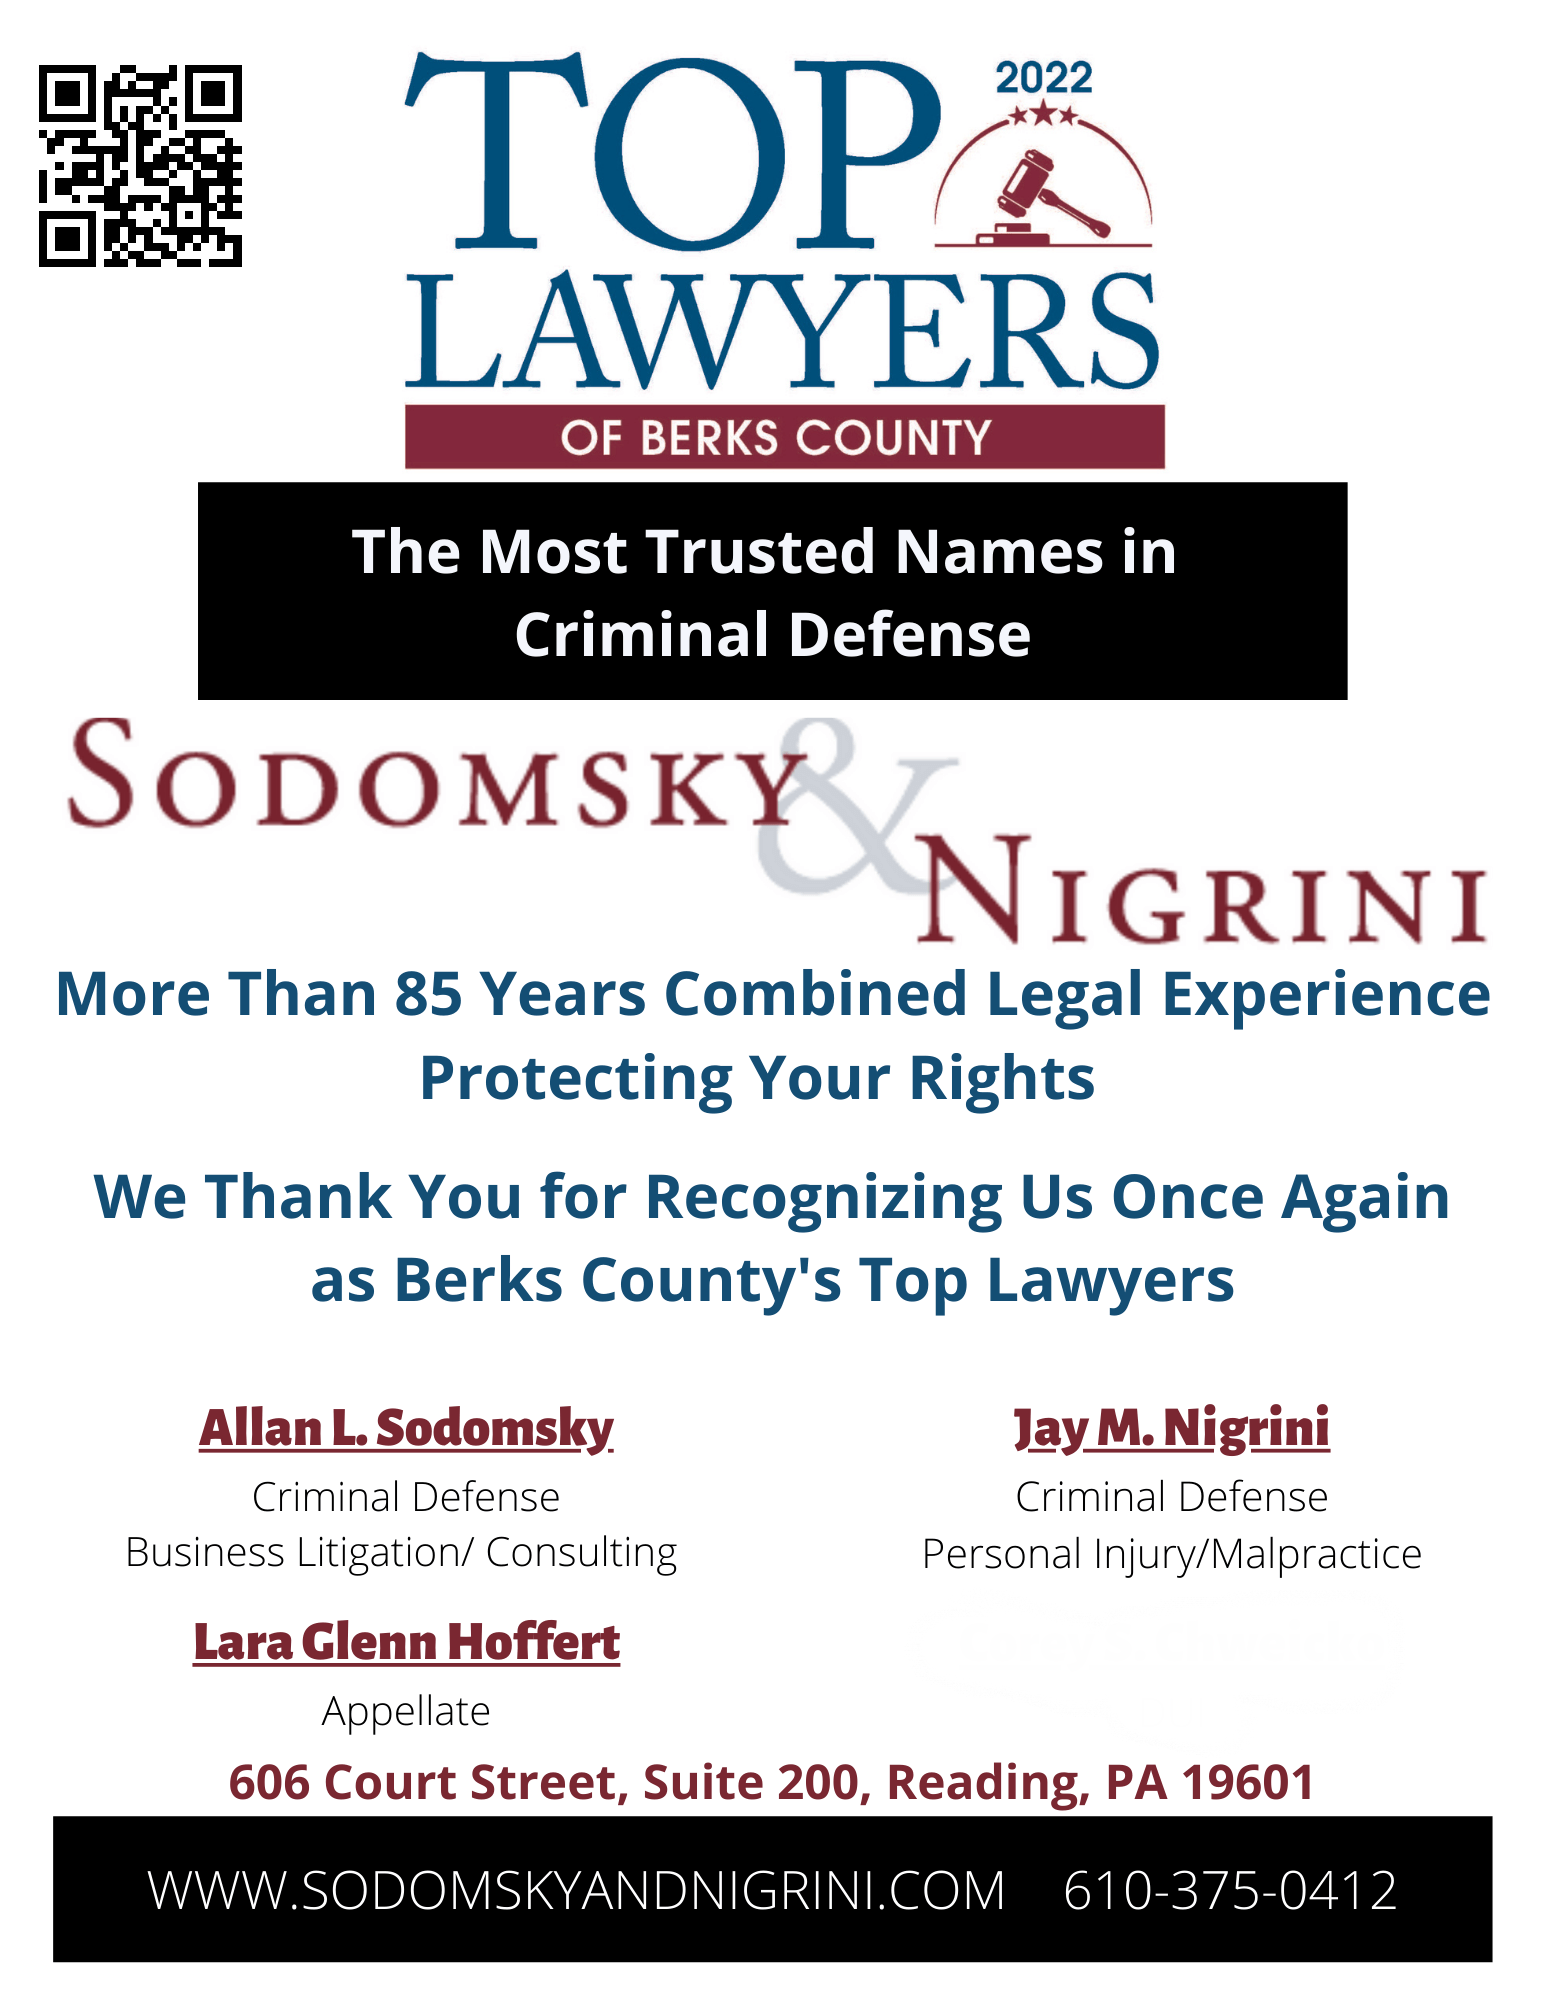 Top Lawyers of Berks County - The Most Trusted Names in Criminal Defense